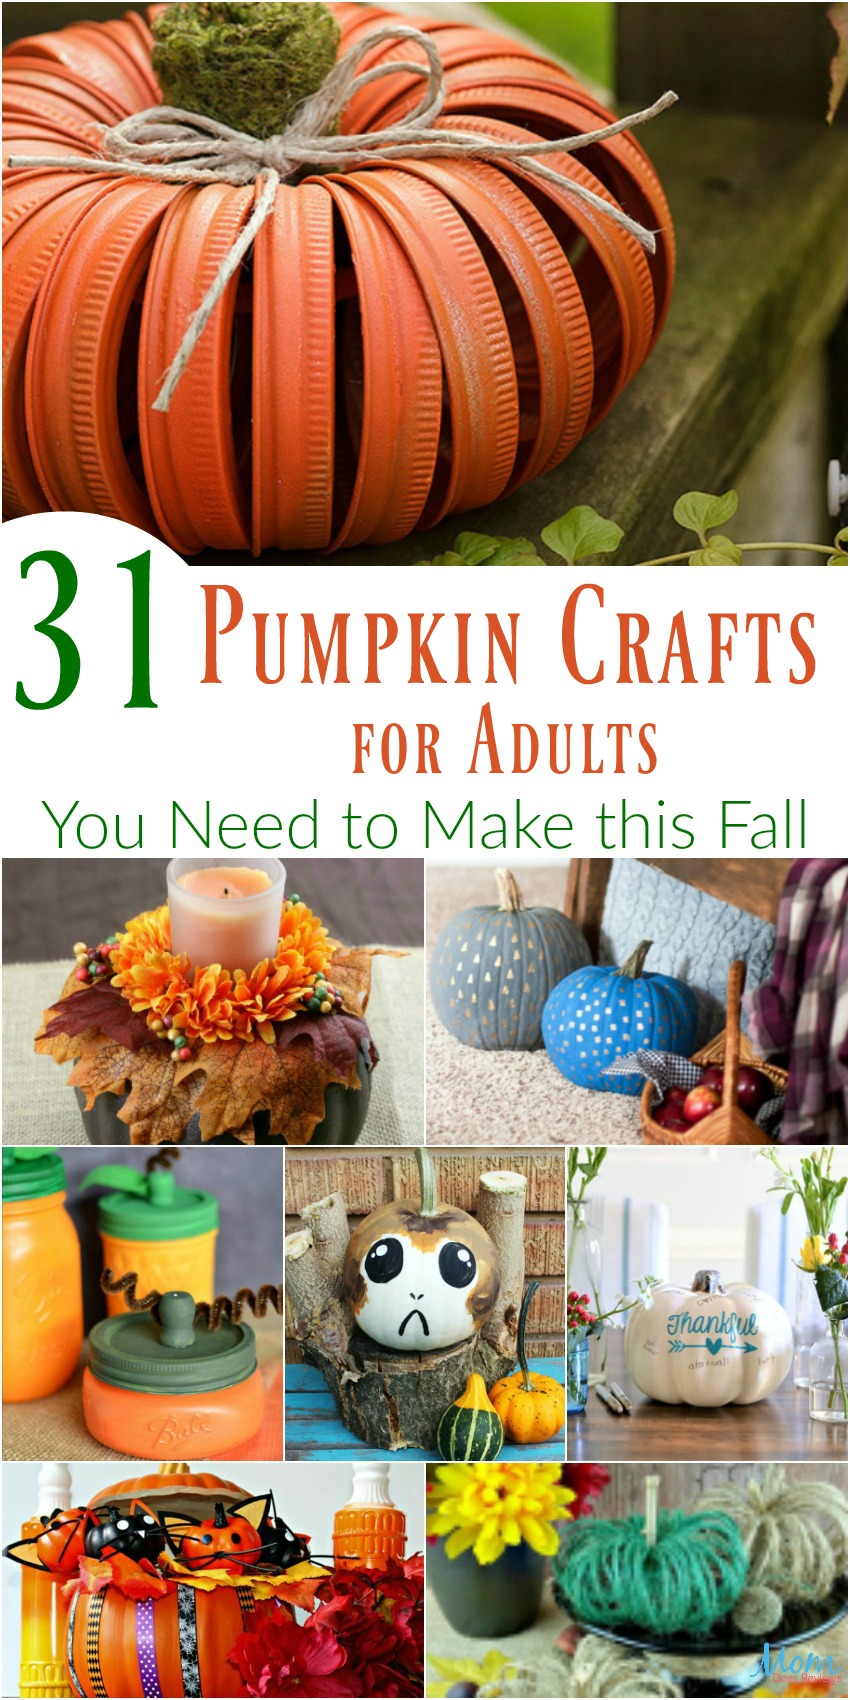 31 Pumpkin Crafts for Adults You Need to Make this Fall